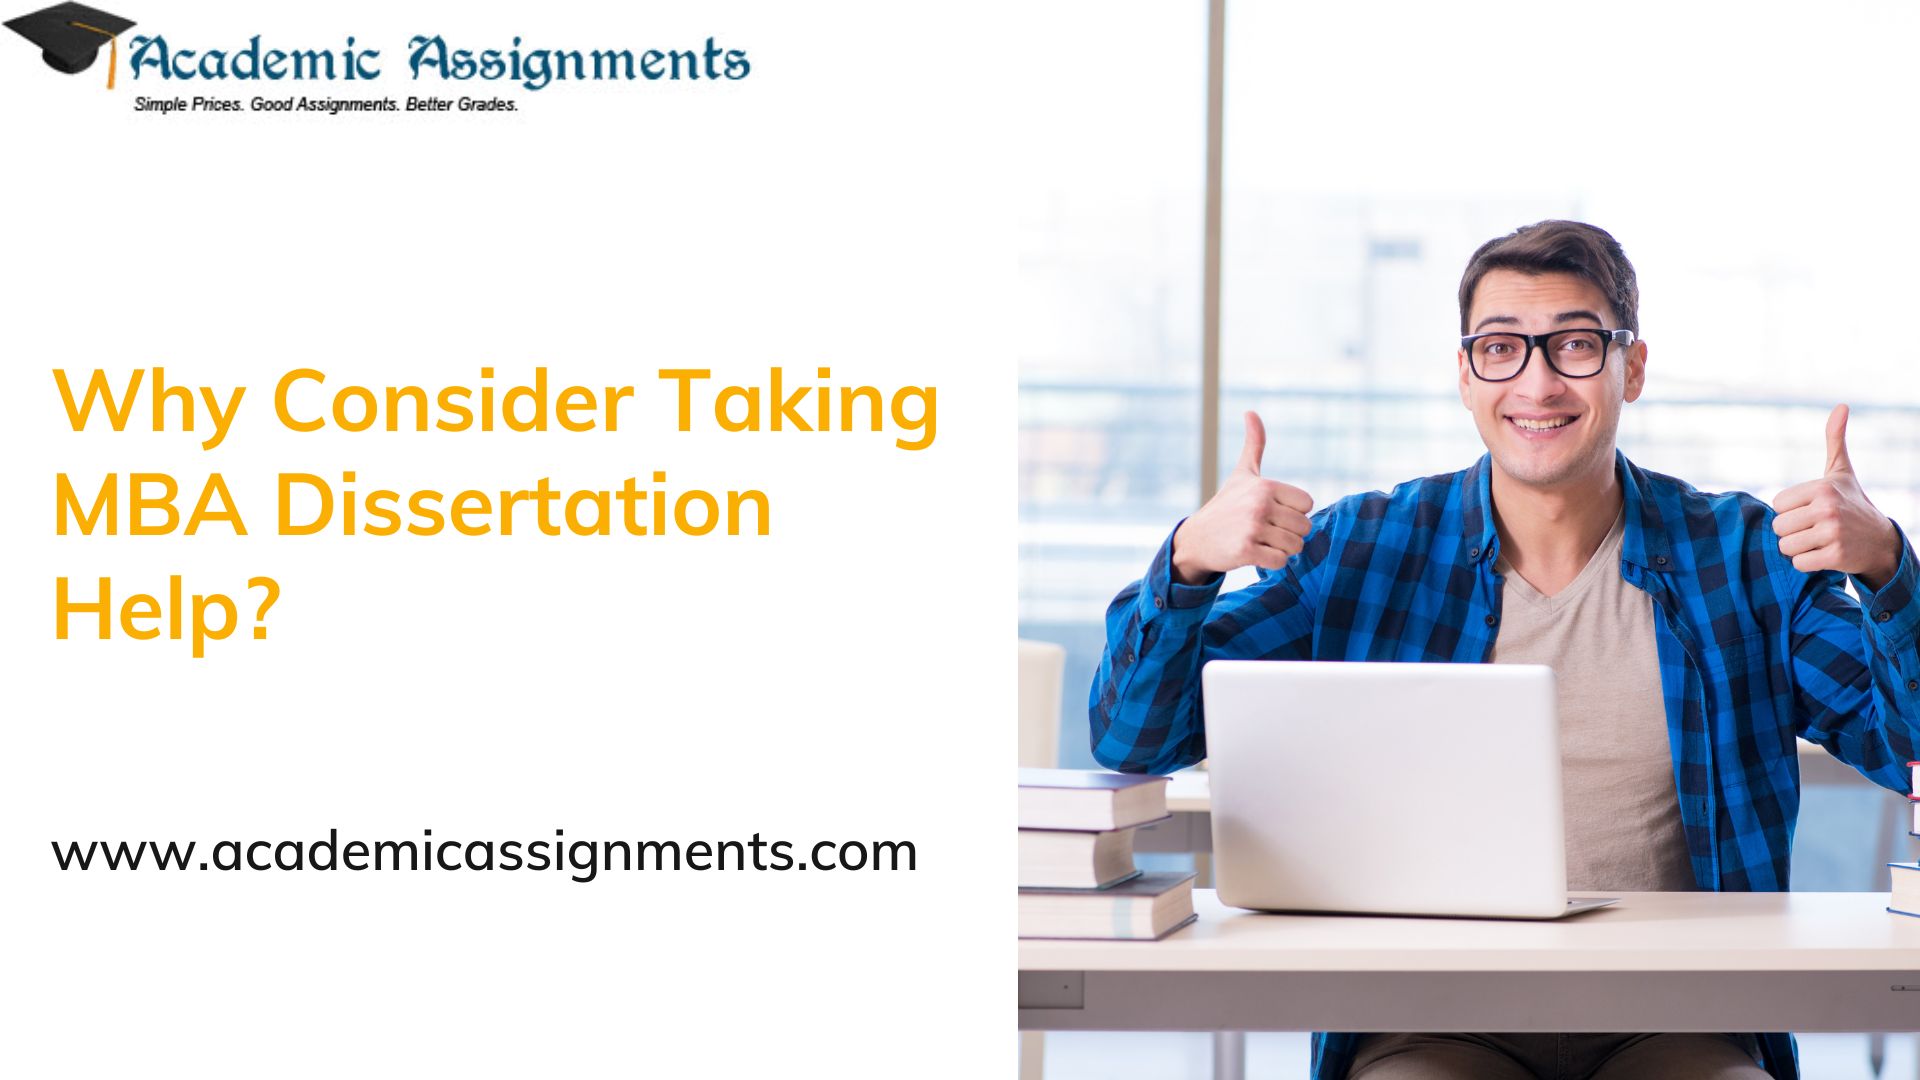 Why Consider Taking MBA Dissertation Help